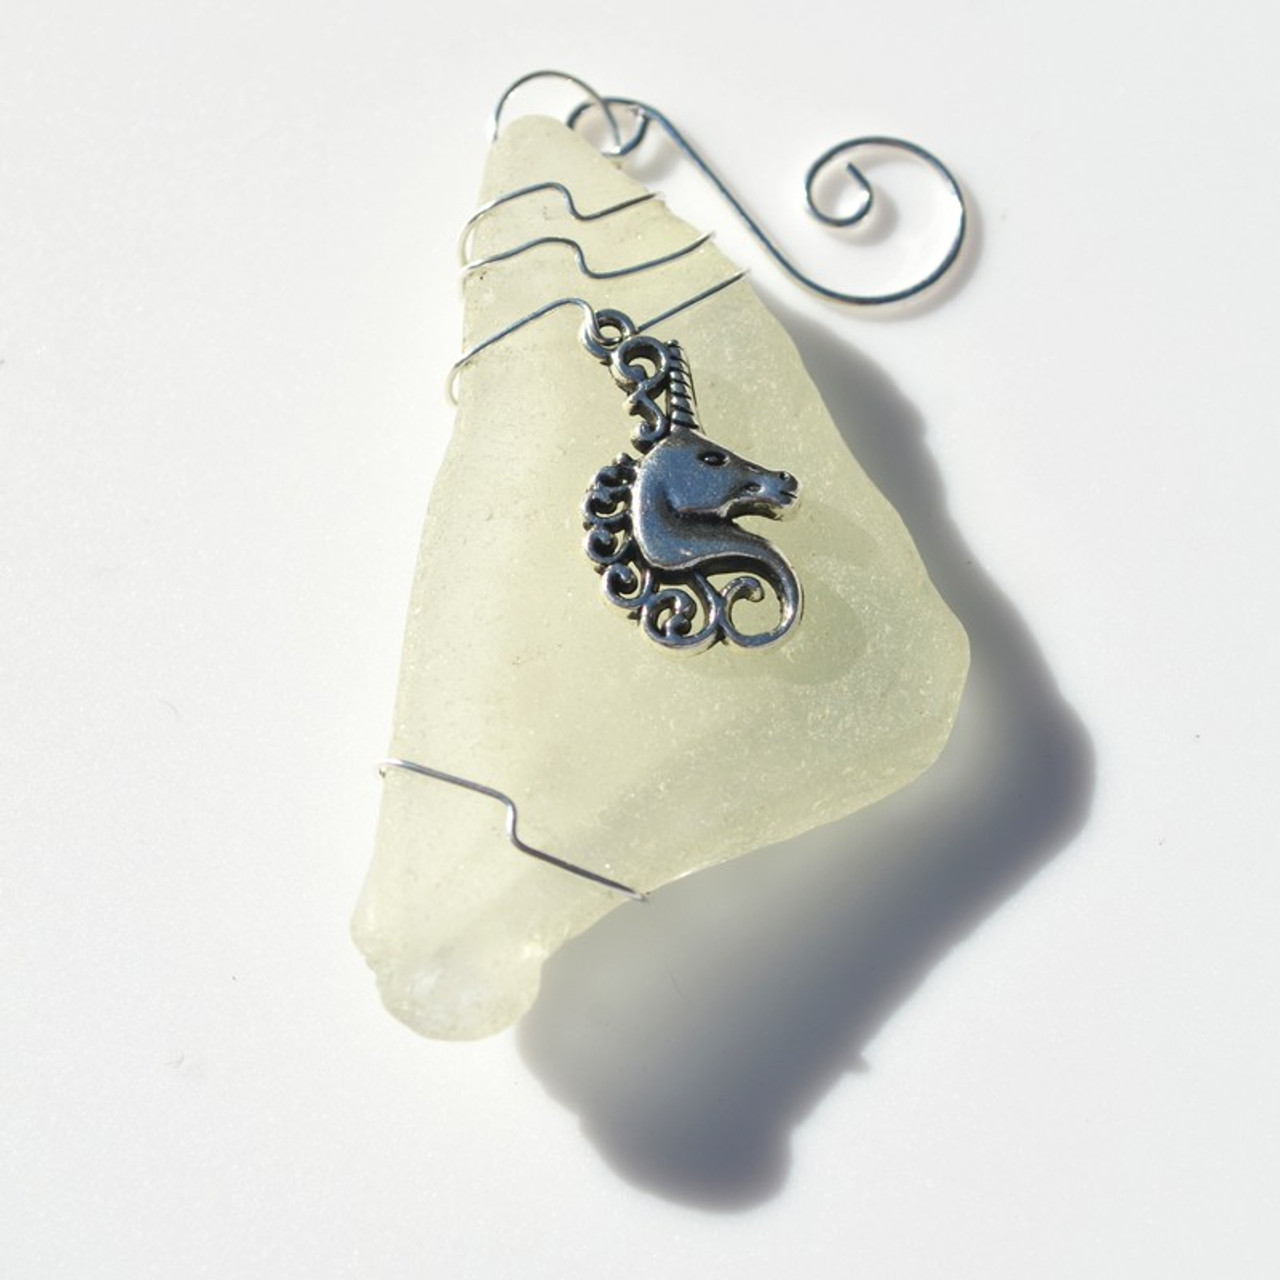 Unicorn Charm Wire Wrapped on a Surf Tumbled Sea Glass Ornament - Choose Your Color Sea Glass Frosted, Green, and Brown - Made to Order